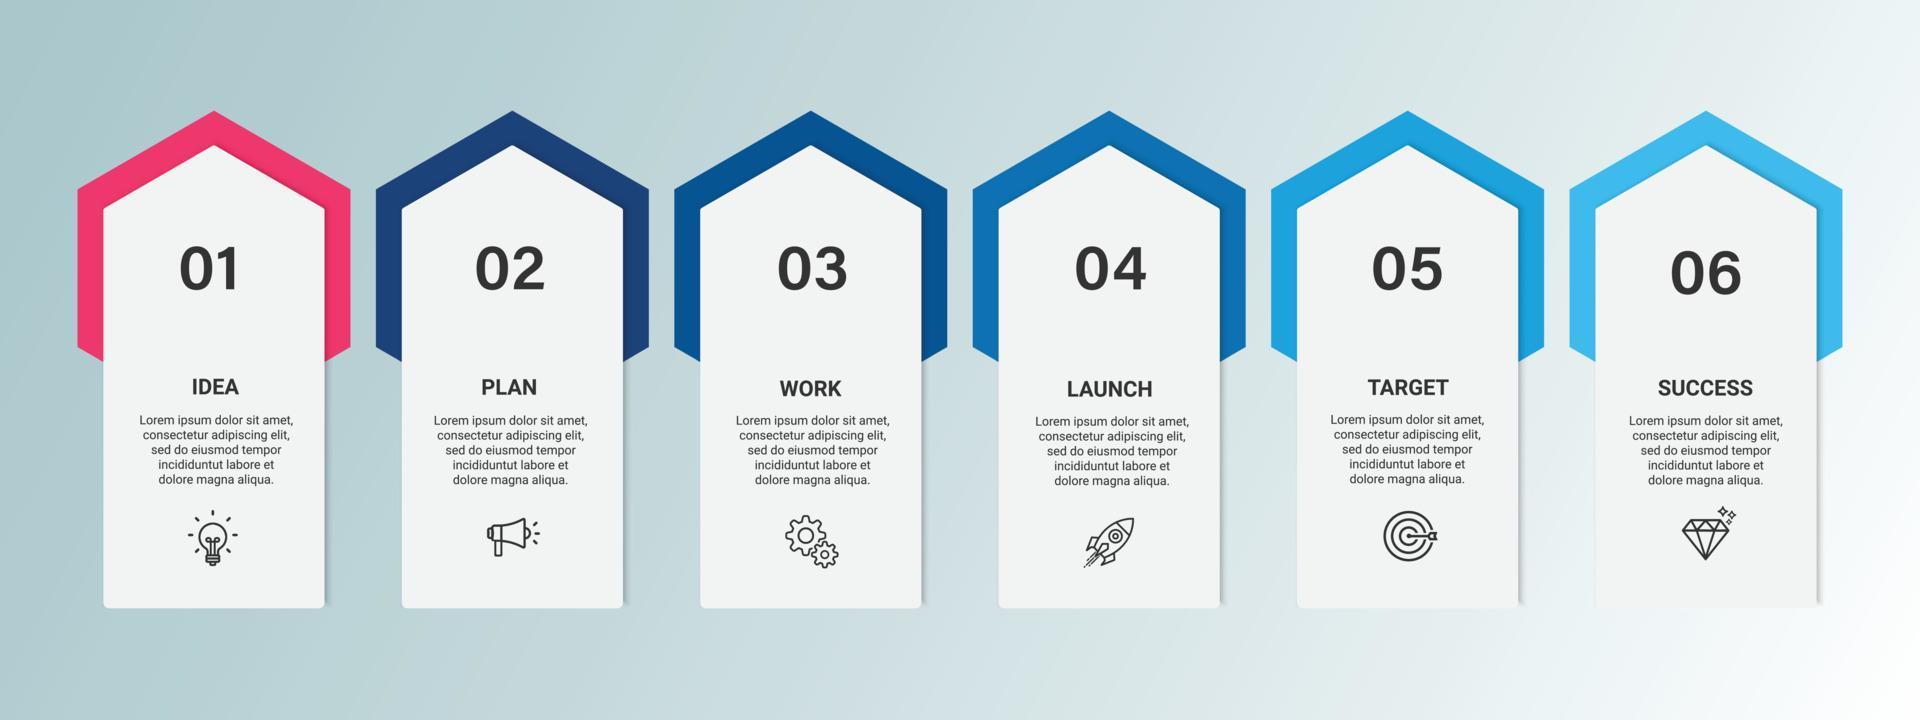 Steps business timeline process infographic template design with icons vector